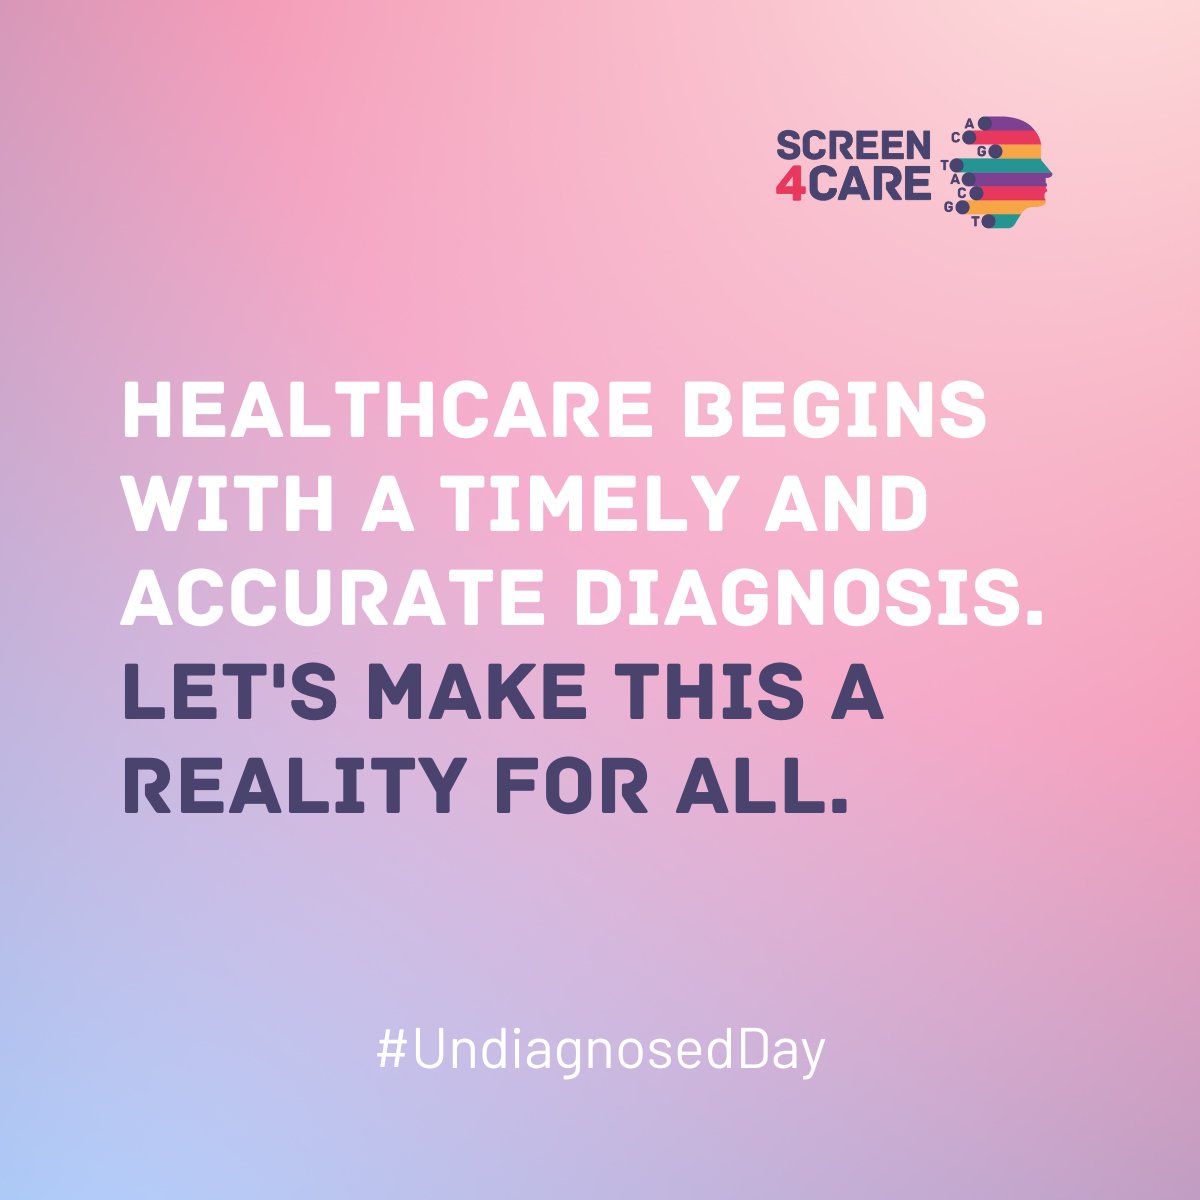 🌸 It's #UndiagnosedDay, a day dedicated to the 350 million people worldwide living with undiagnosed diseases. We're committed to supporting the undiagnosed community by advancing sequencing-based newborn screening, offering hope to countless families. #Screen4Care #RareDisease